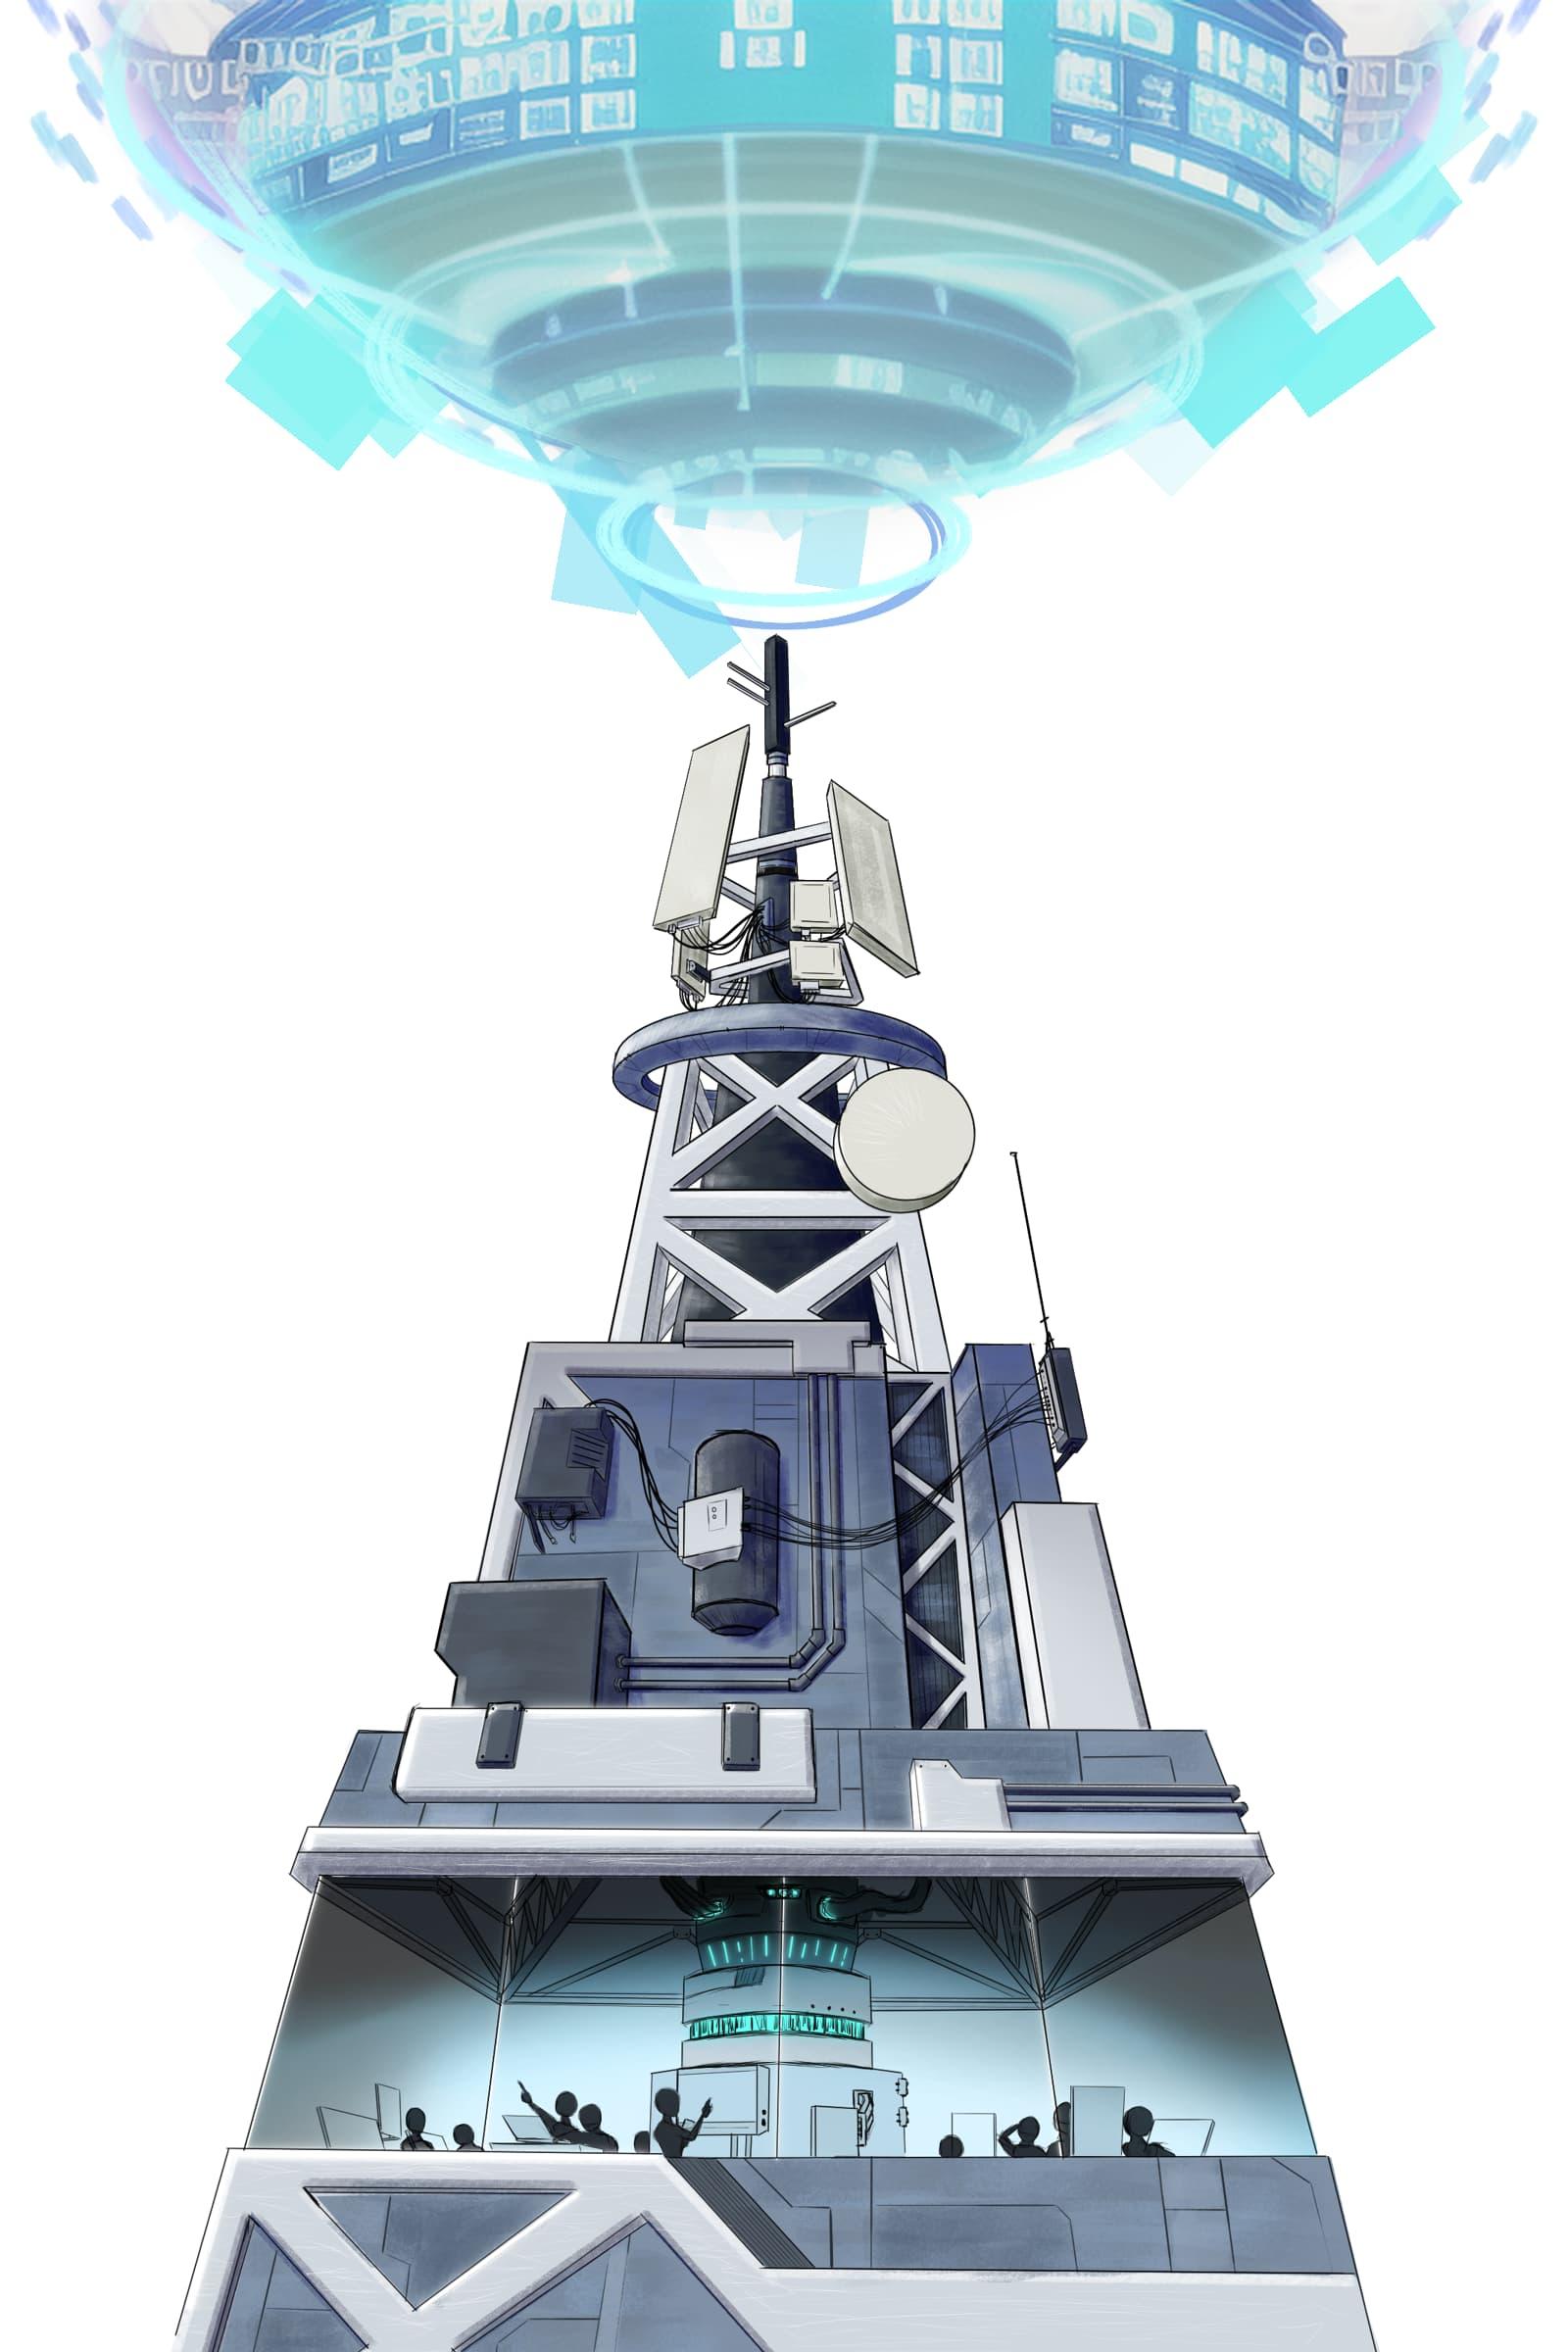 An illustration of a skyscraper broadcast tower, sending off a virtual signal into space, this time with some AI-enhanced effects